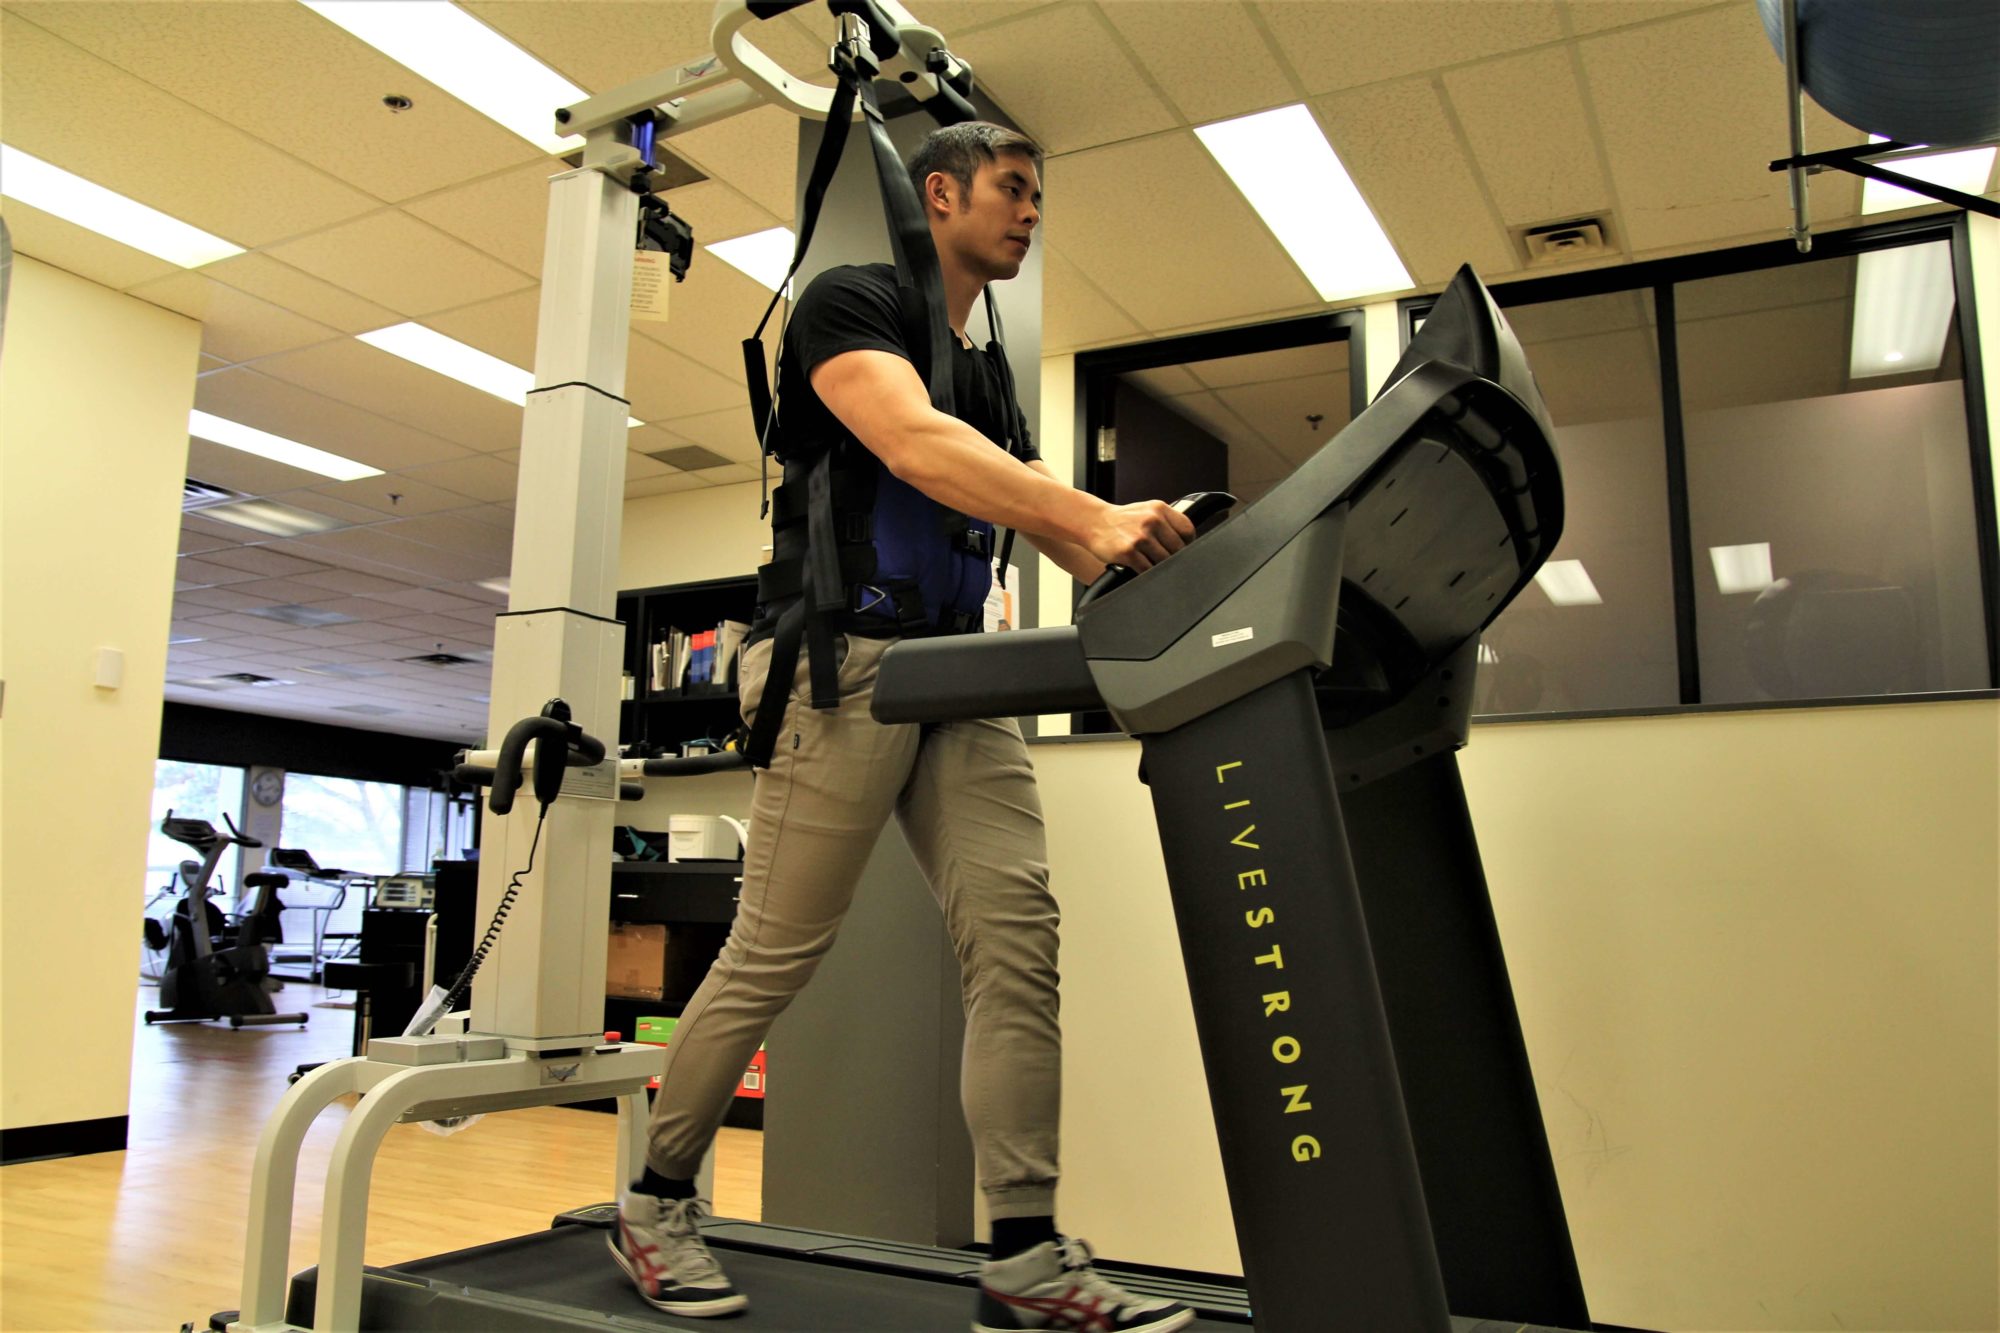 Body Weight Support Treadmill Training Body Weight Support System Propel Physiotherapy Etobicoke